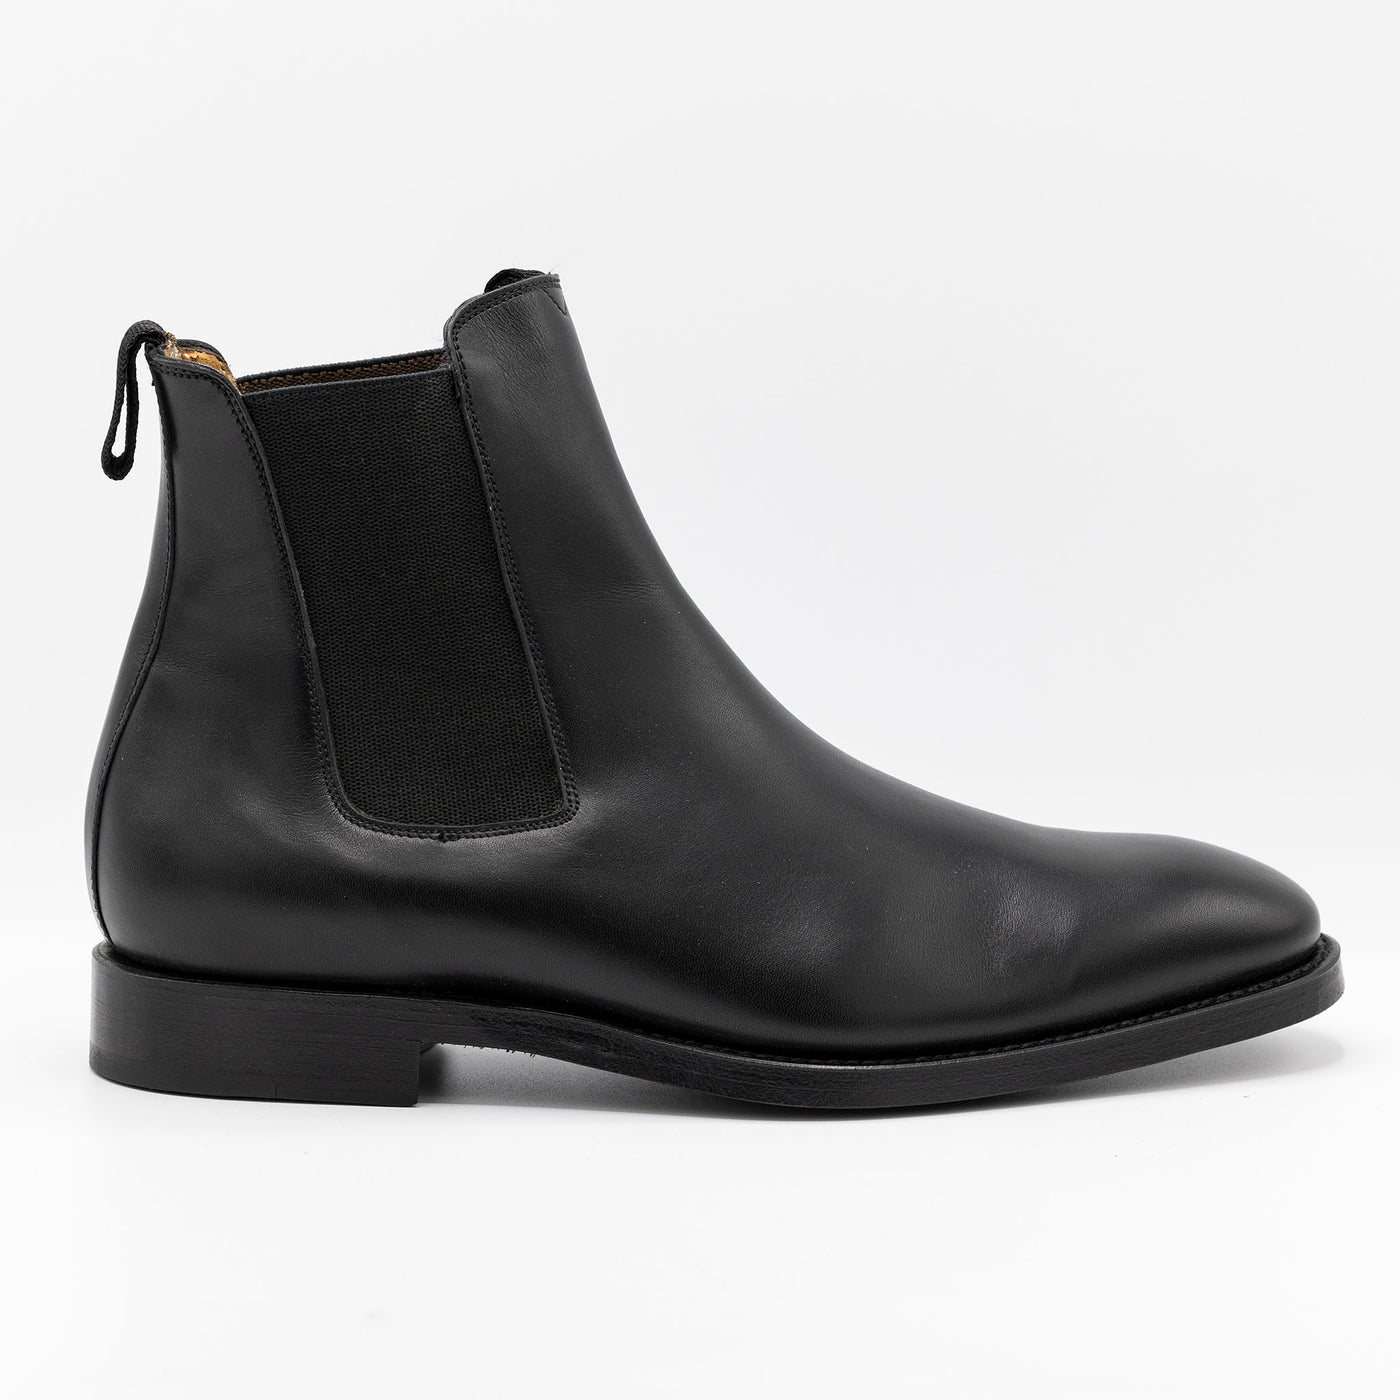 CHELSEA BOOTS in BLACK LEATHER BY MANO